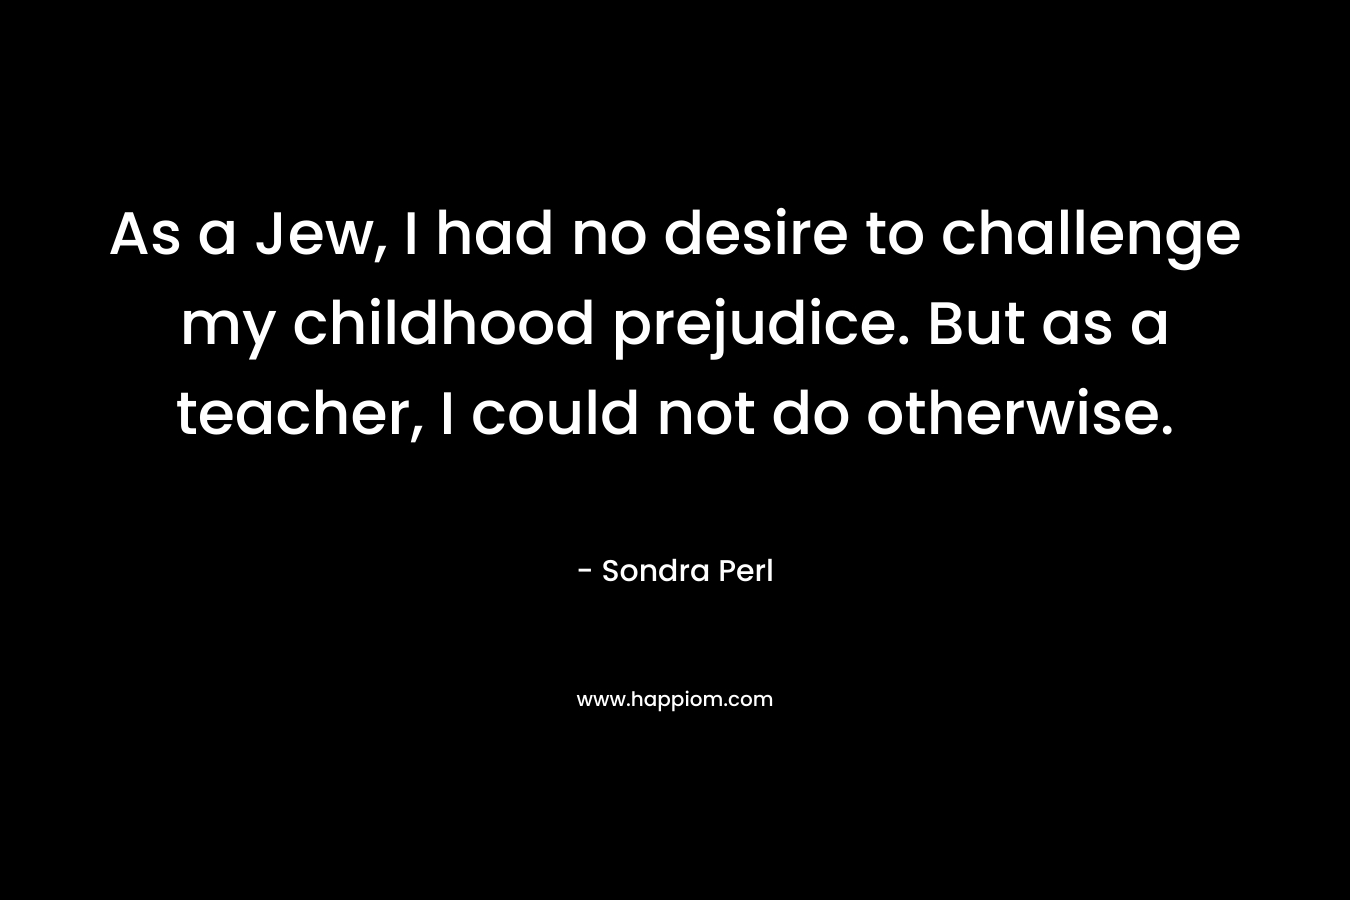 As a Jew, I had no desire to challenge my childhood prejudice. But as a teacher, I could not do otherwise. – Sondra Perl